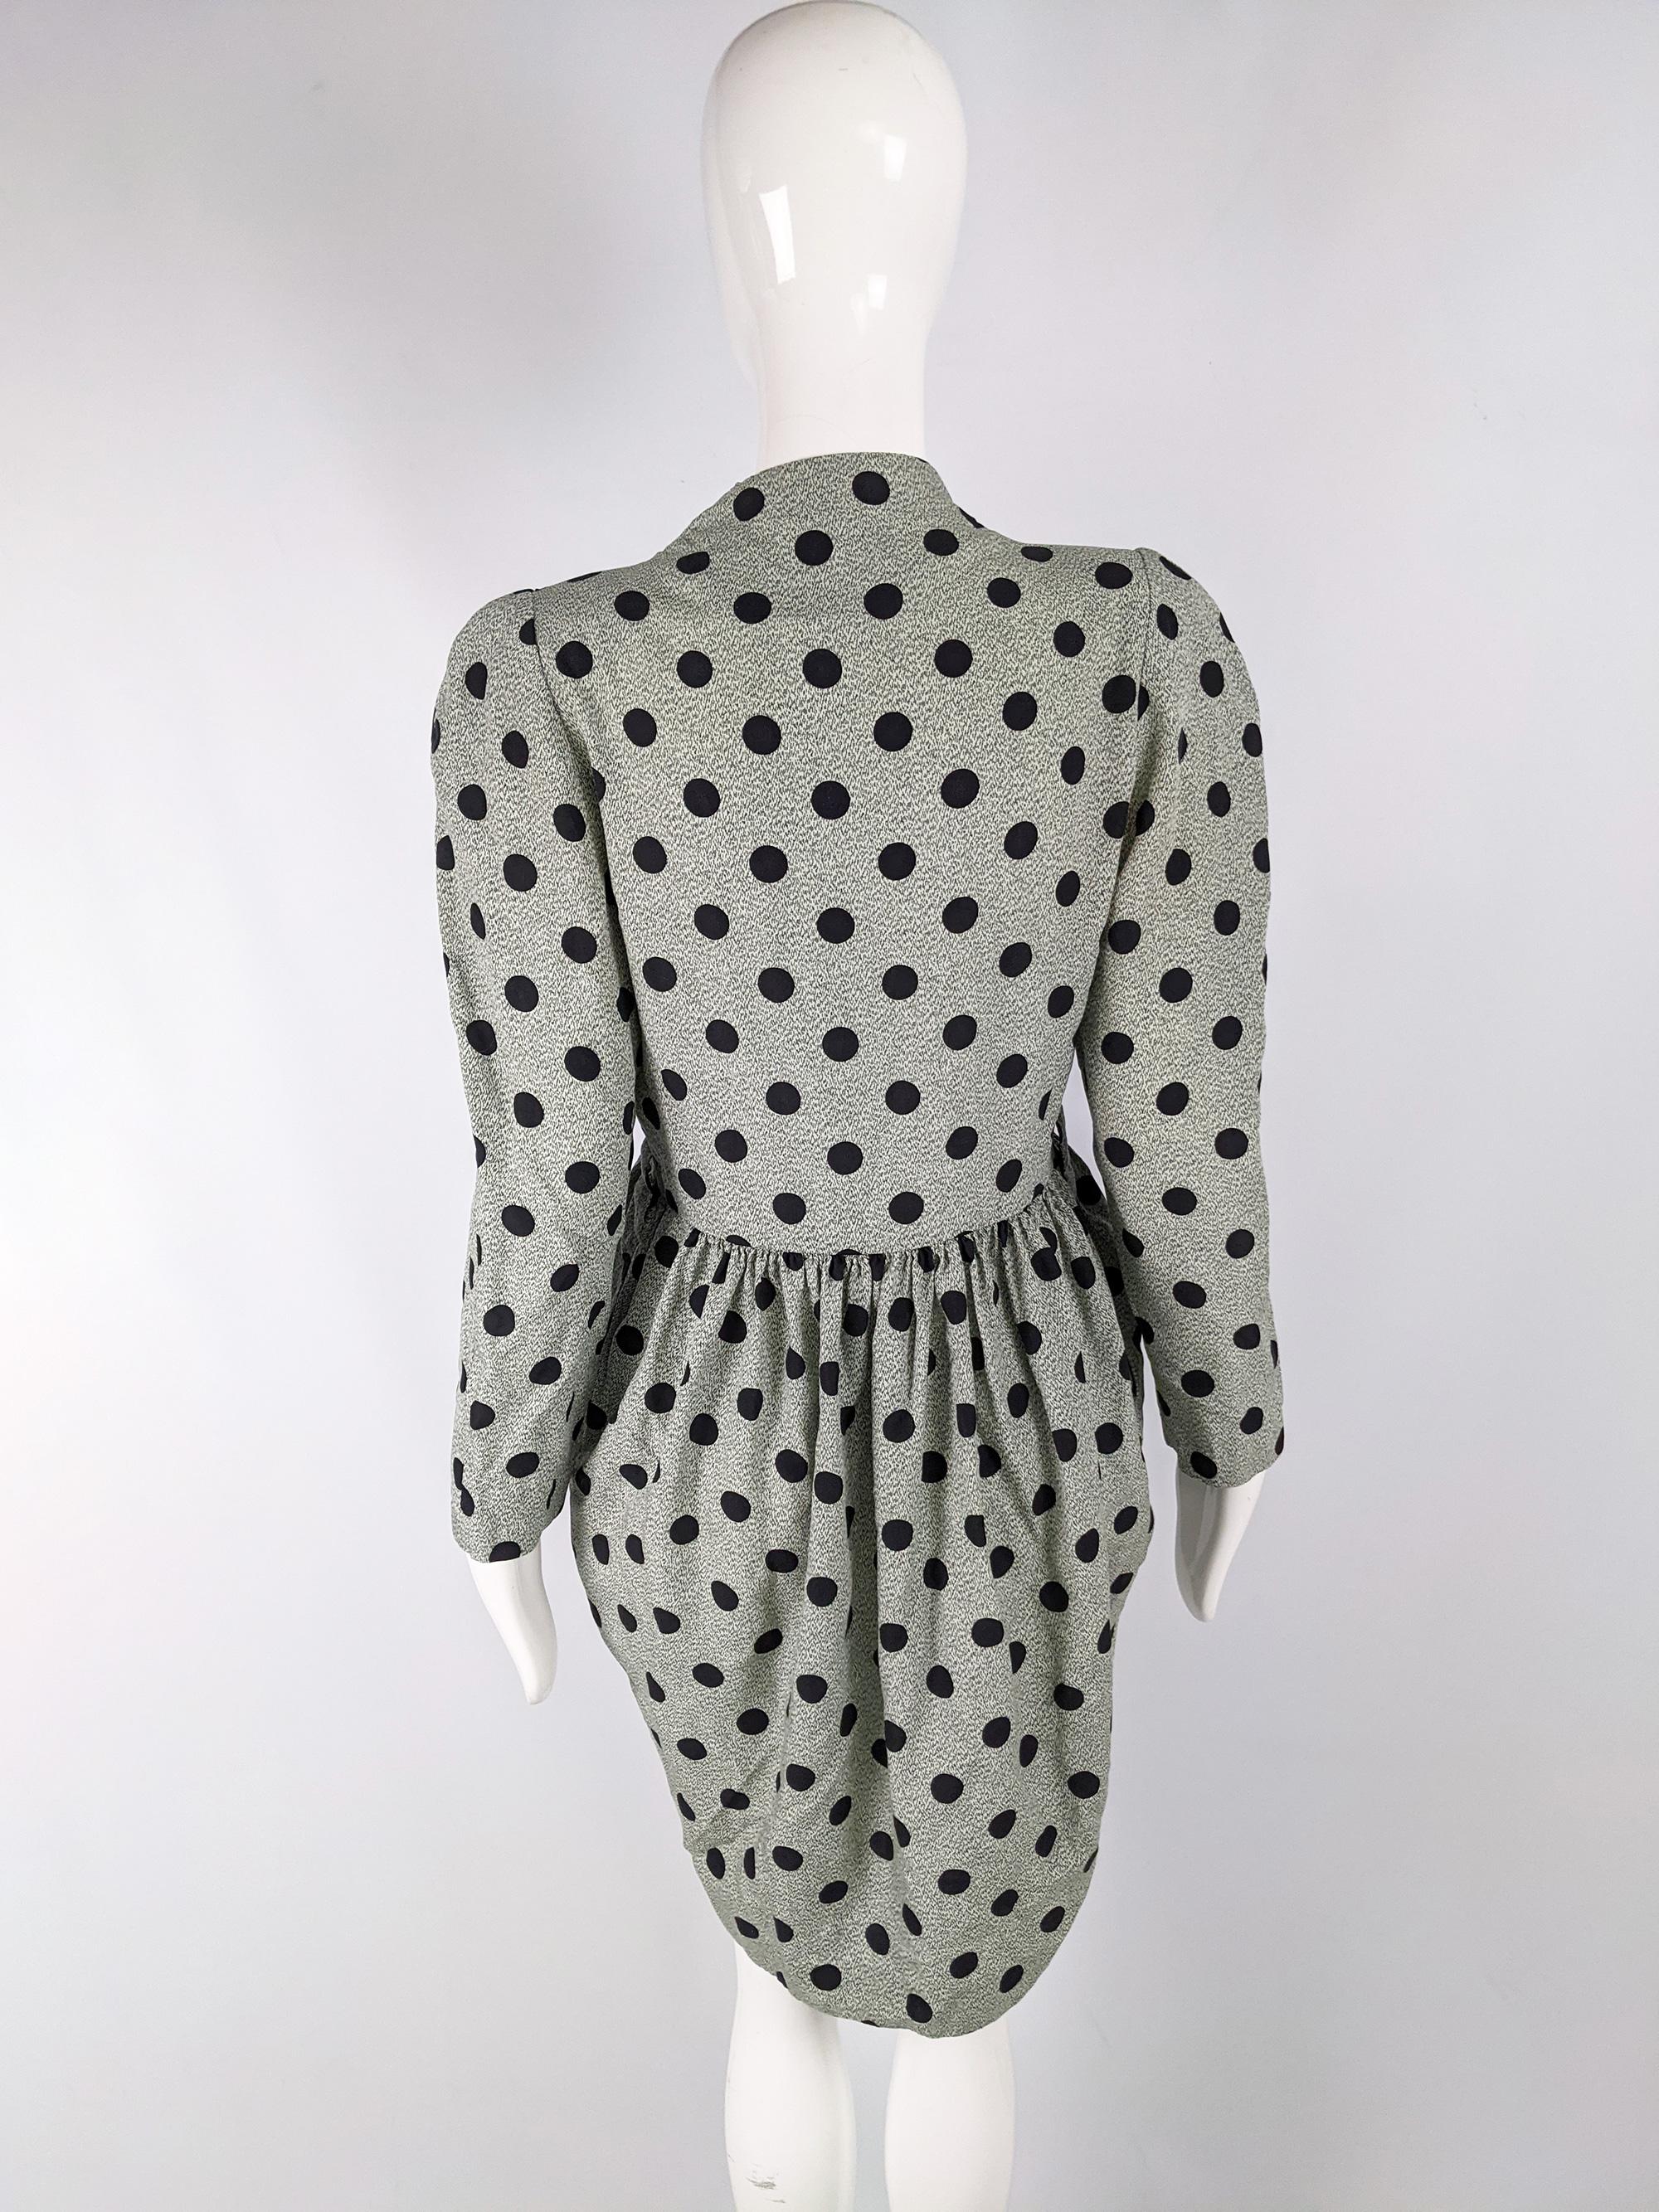 Williwear by Willi Smith Vintage Documented Polka Dot Dress, 1984 In Good Condition For Sale In Doncaster, South Yorkshire